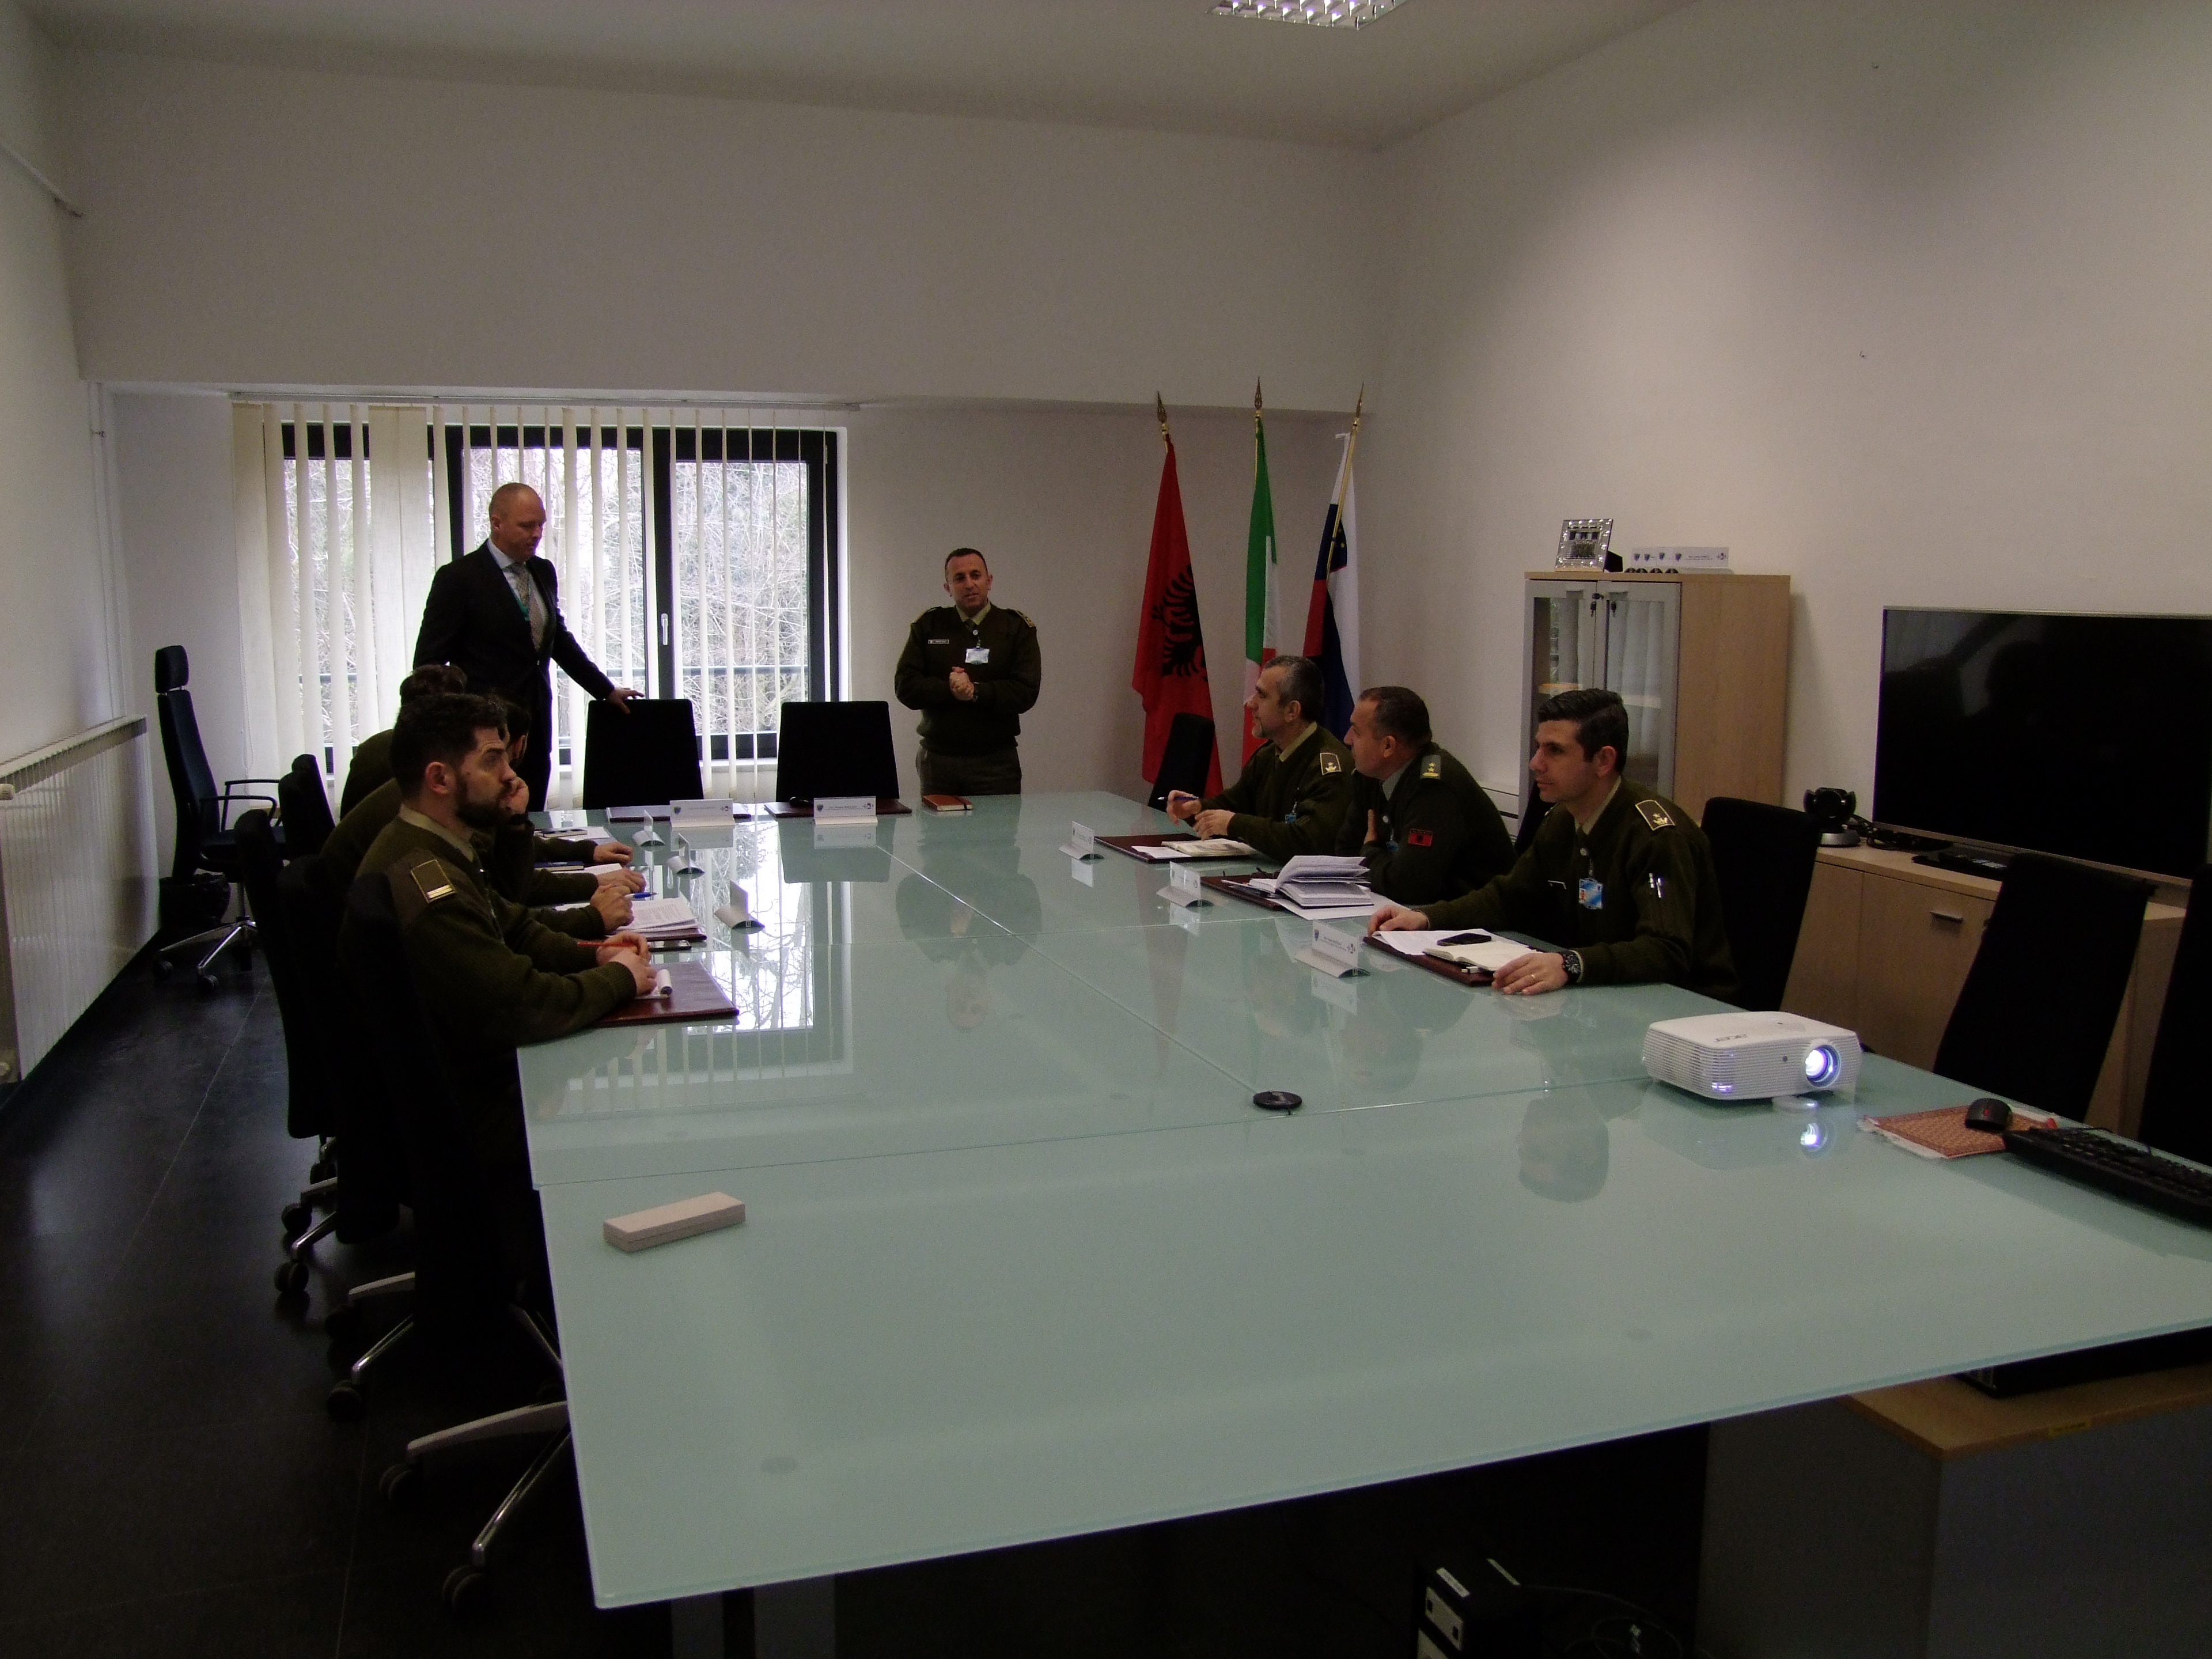 NATO SFA COE: Infantry officer of the Dutch Army visits the Centre for an interdisciplinary exchange